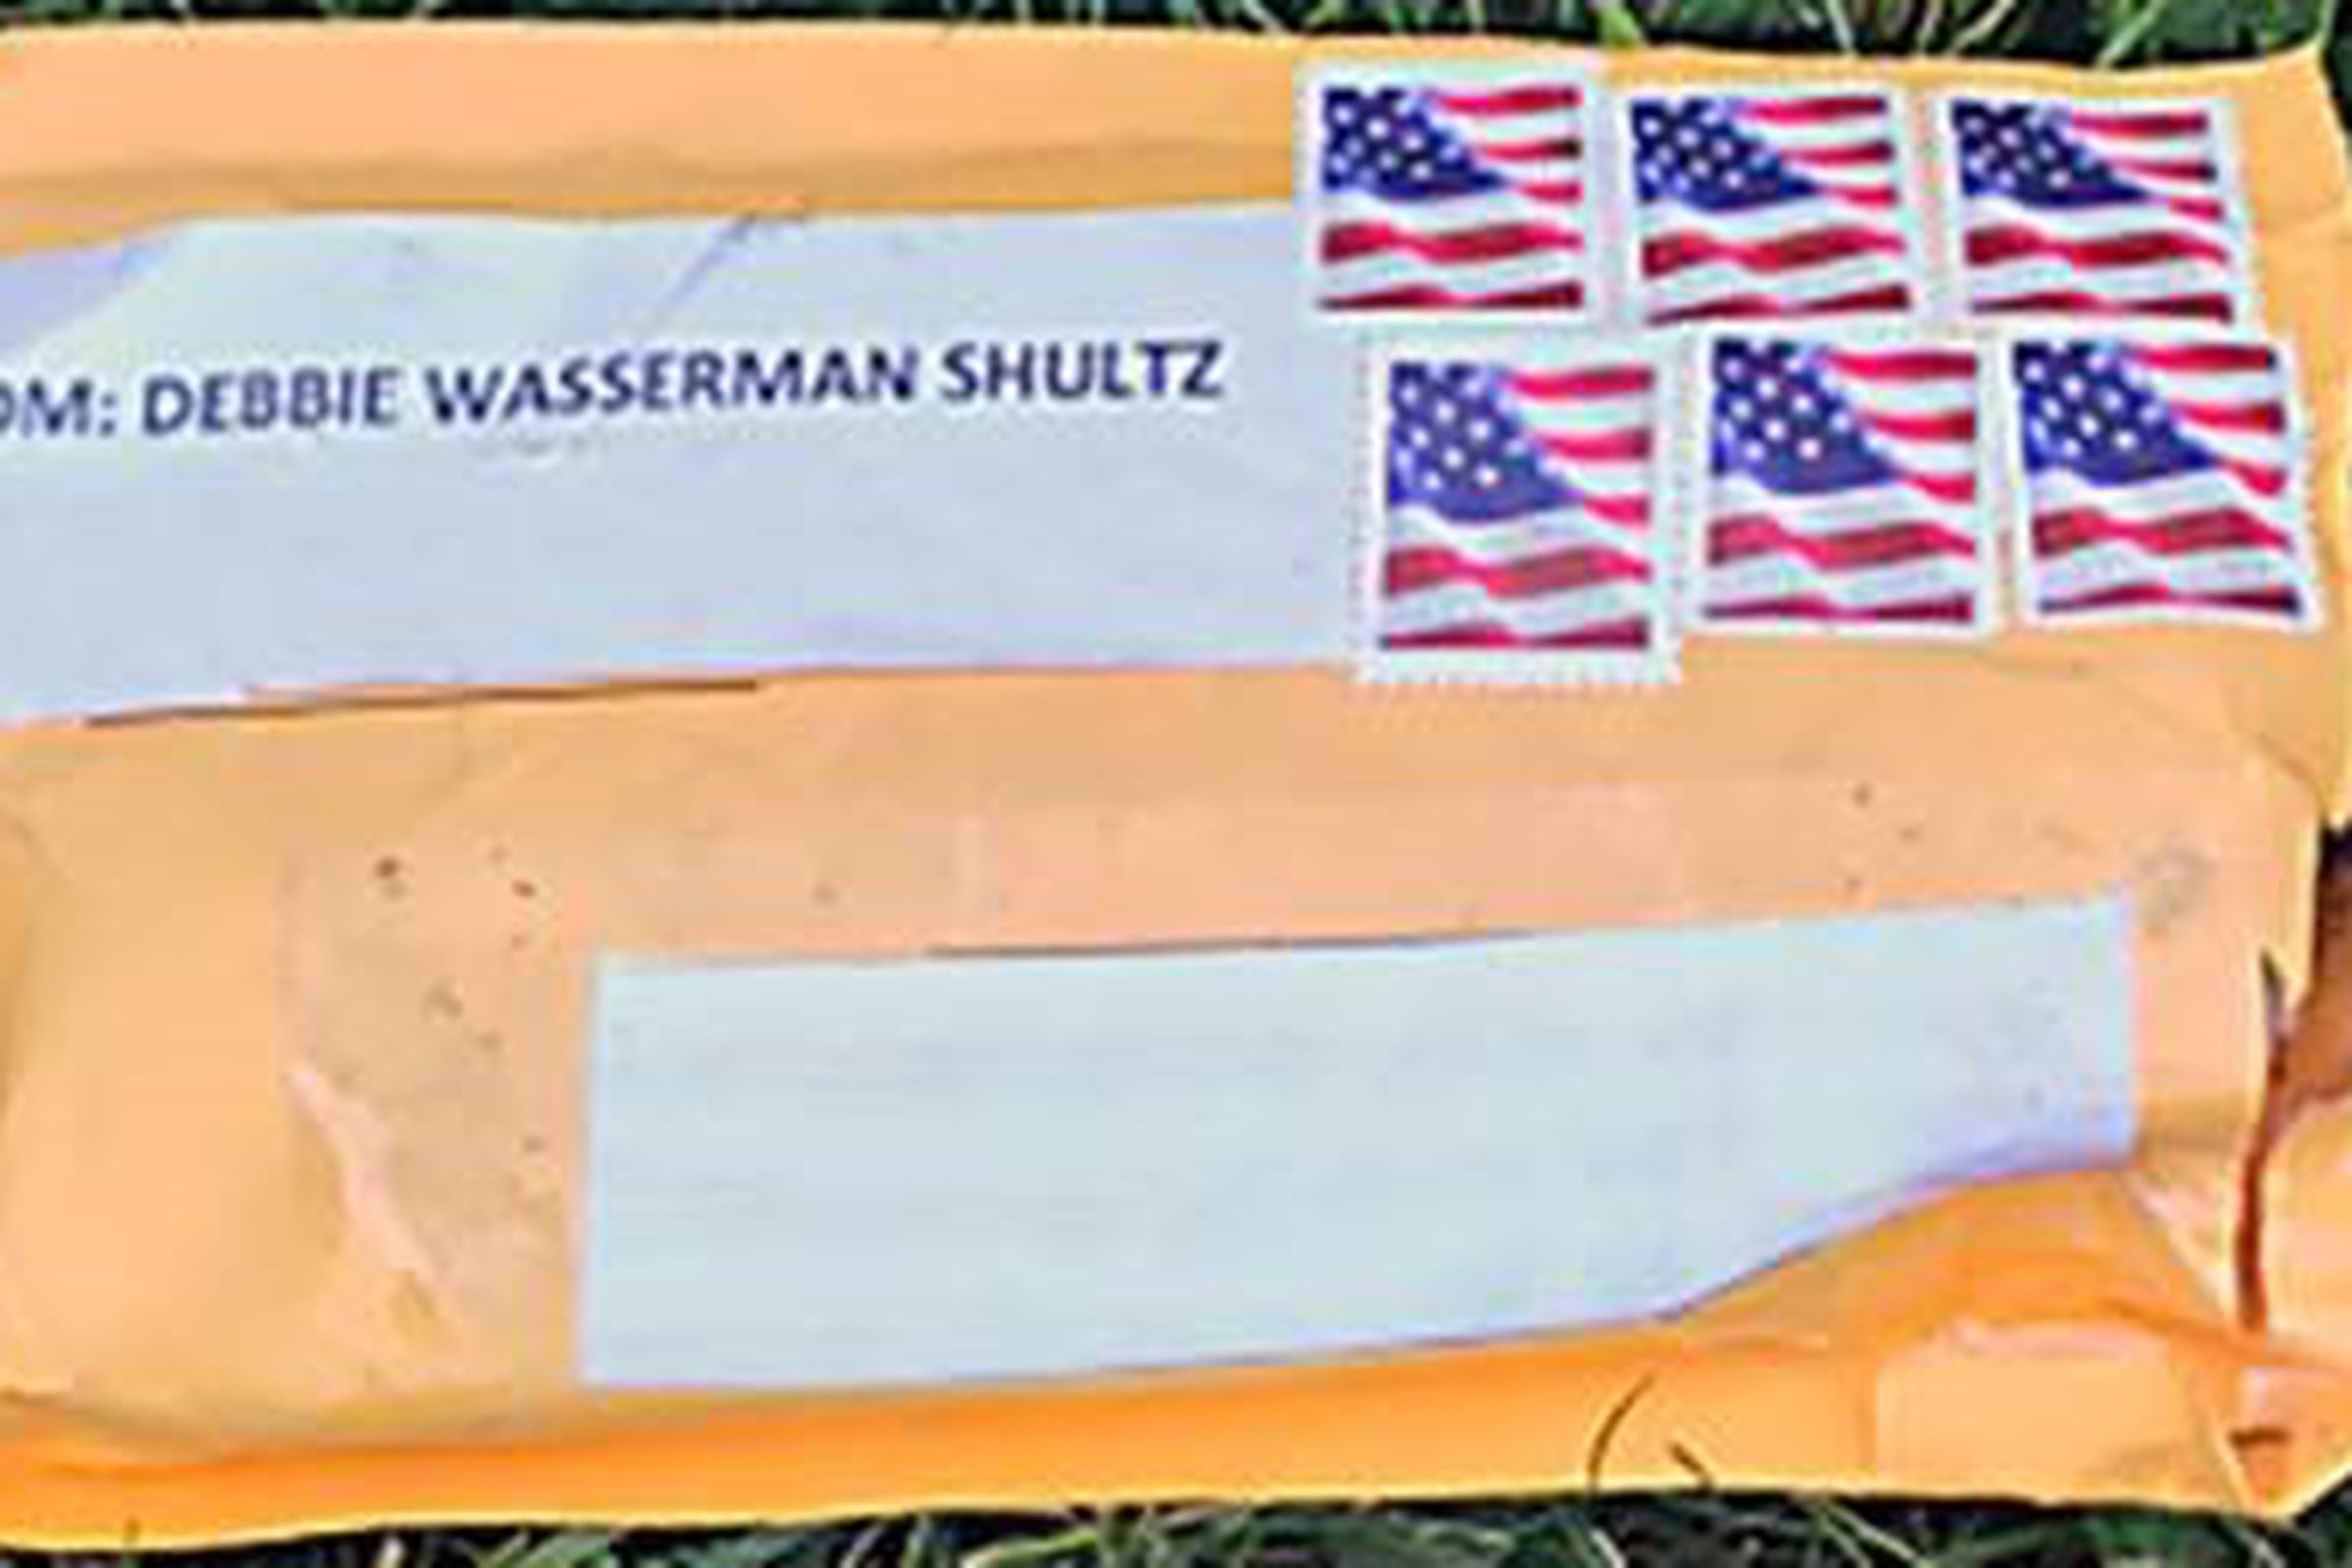 FBI Handout of Mailed Bomb Package